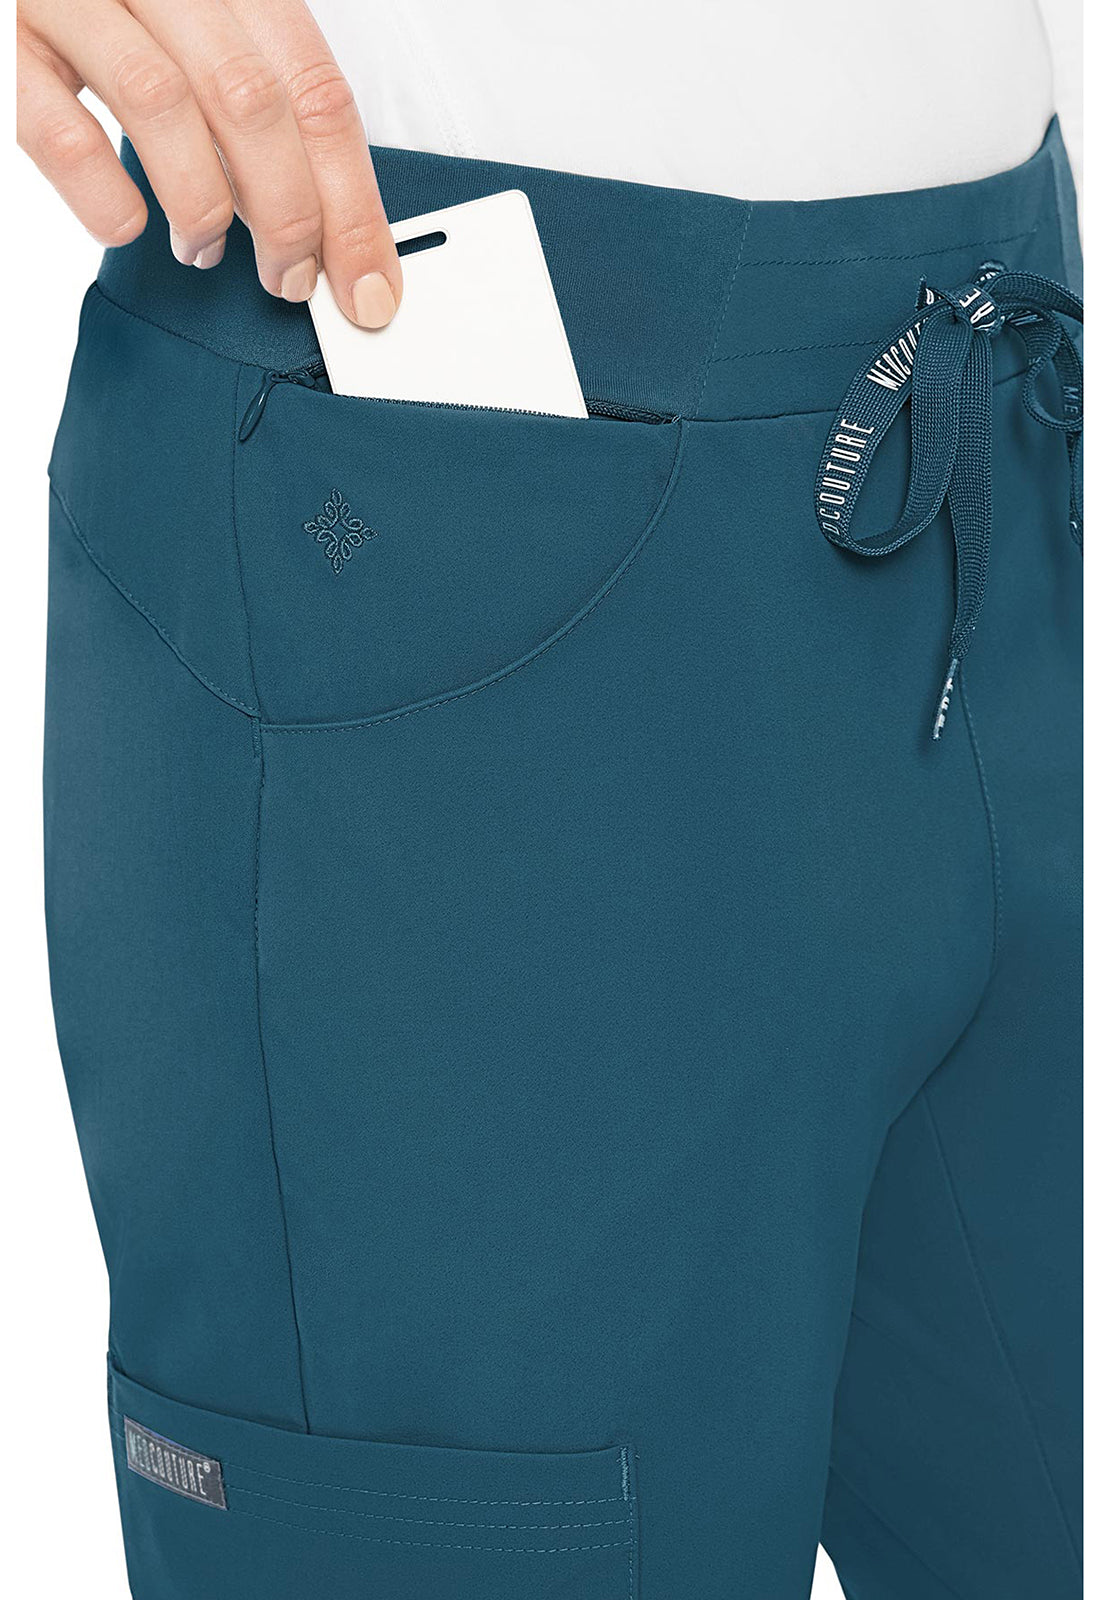 Clearance Med Couture Peaches Scoop Pocket Pants